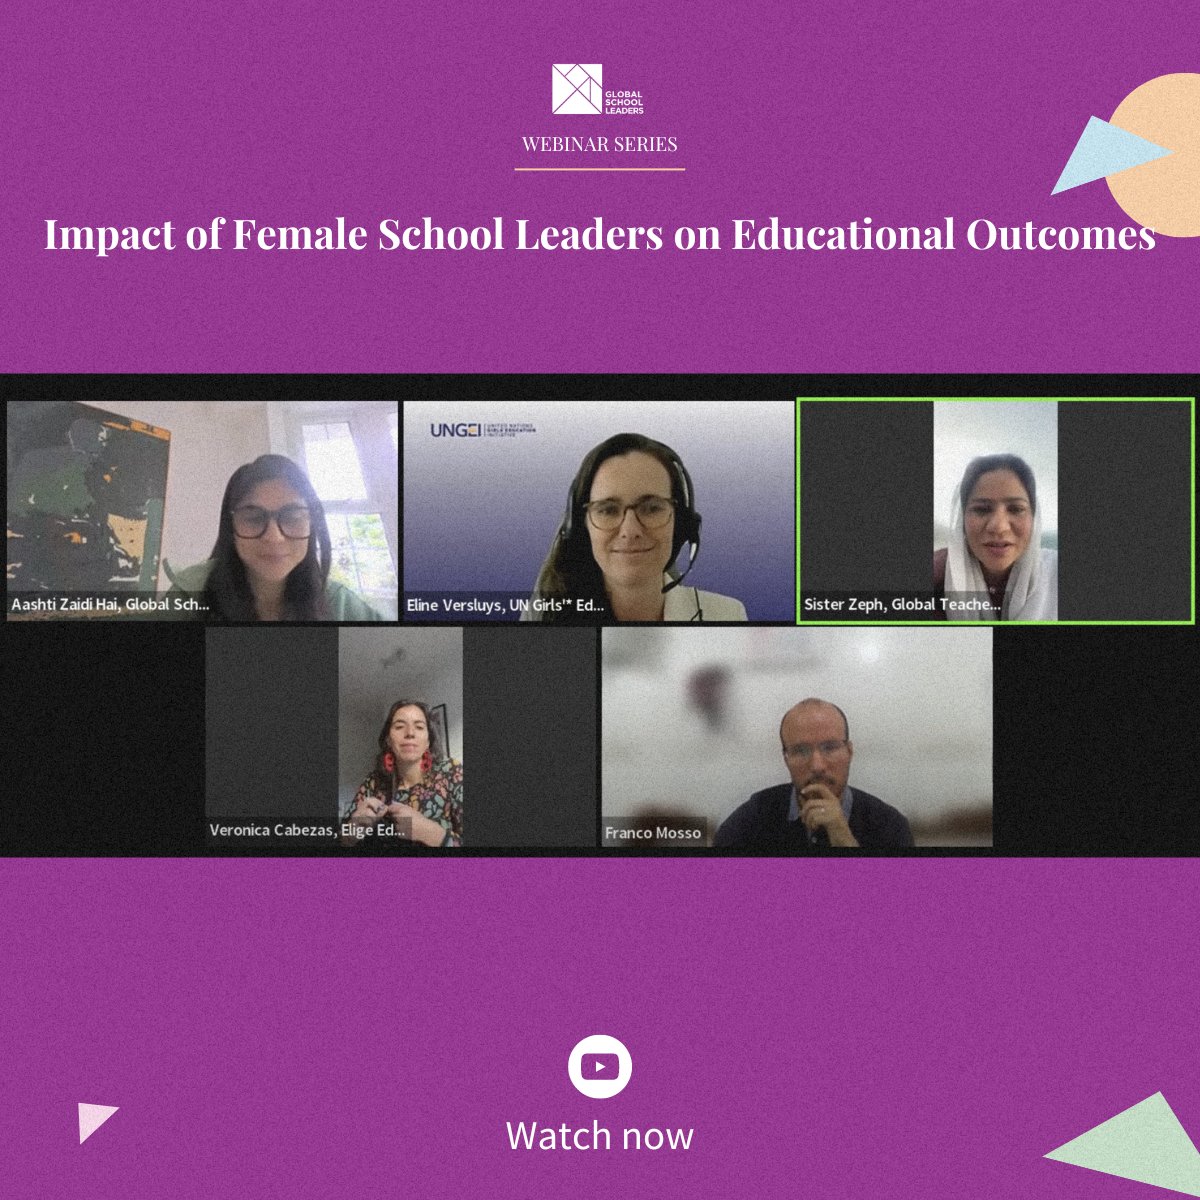 💫Our two-part webinar series shone an important light on the role of gender in school leadership. Watch the webinars here: 🔸Underrepresentation of Female School Leaders: bit.ly/44lXyJZ 🔸Impact of Female School Leaders on Educational Outcomes: bit.ly/4bnnV4H